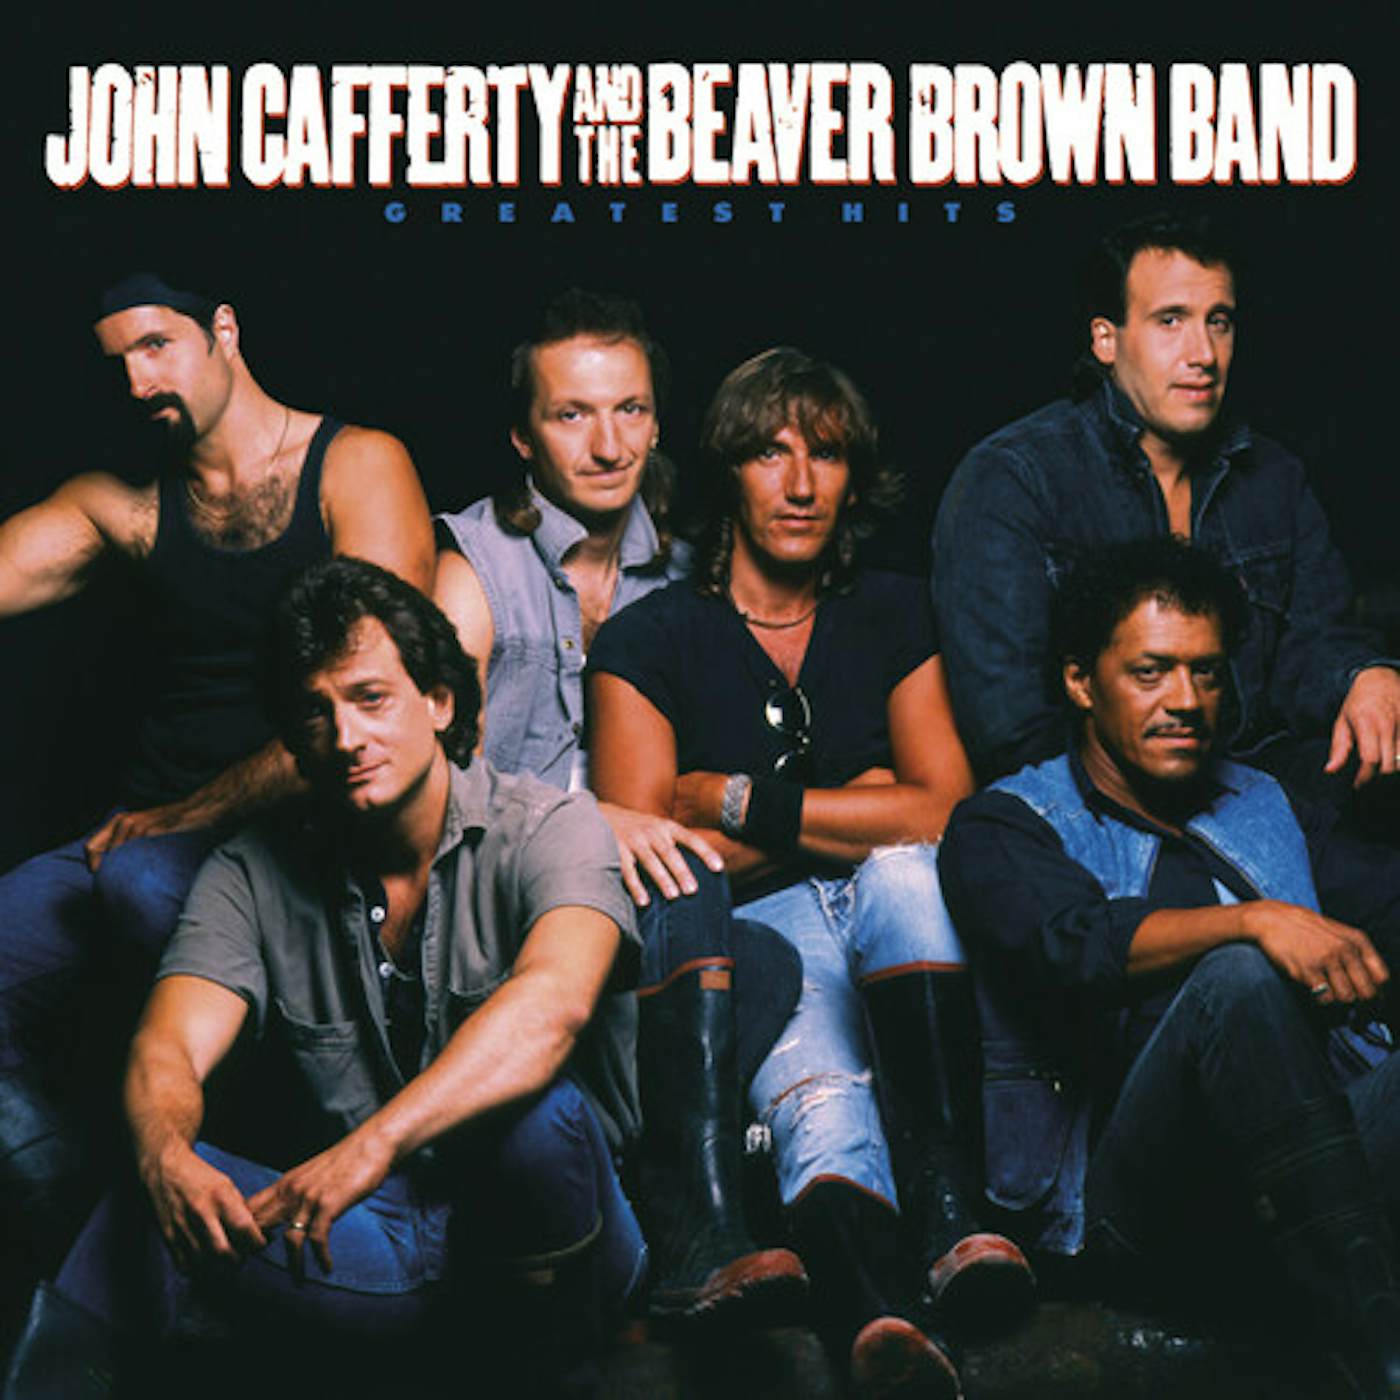 John Cafferty & the Beaver Brown Band GREATEST HITS CD